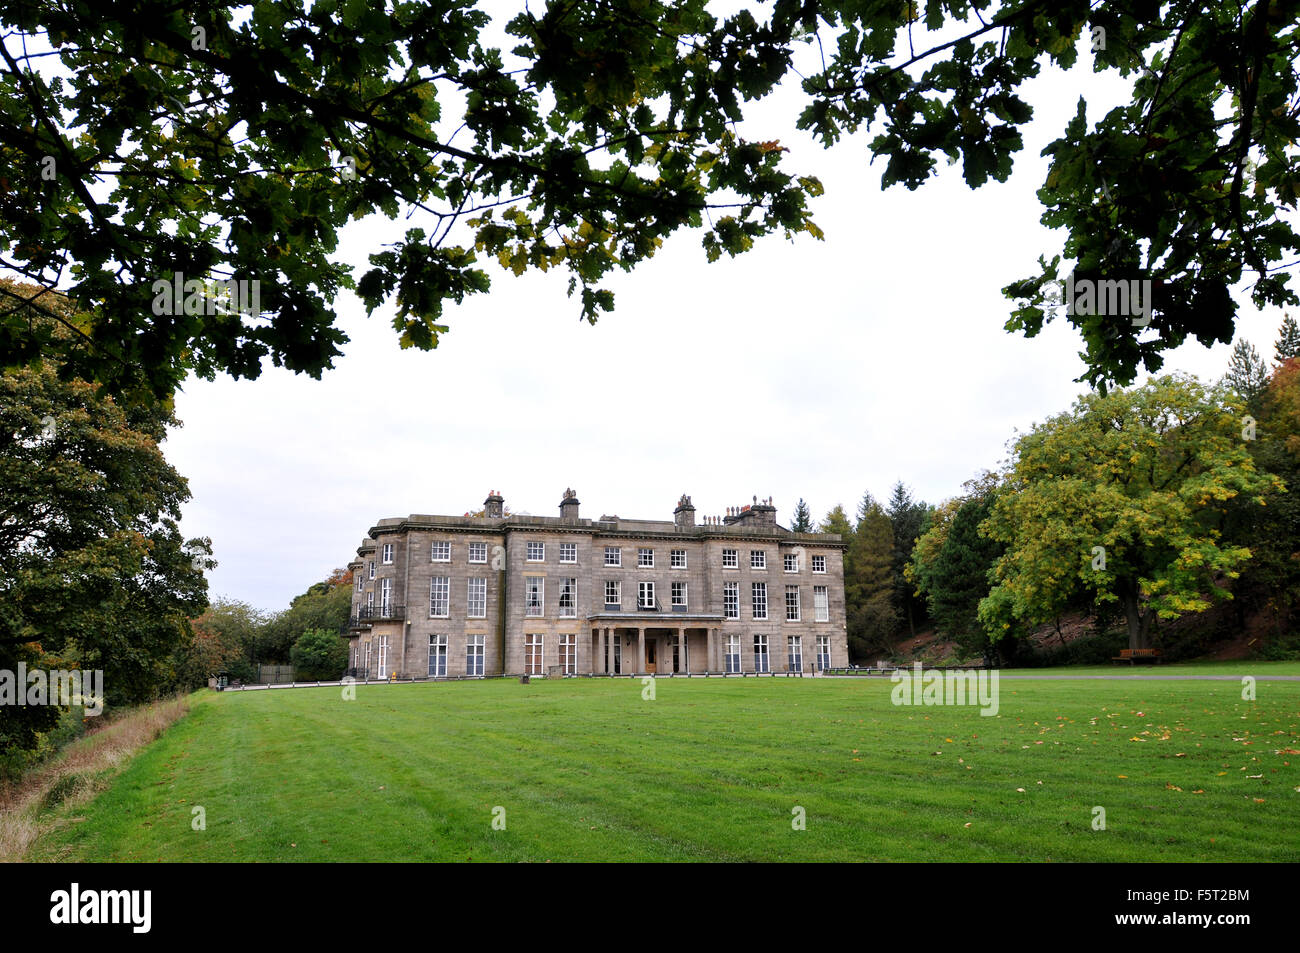 Haigh Hall, Wigan, Lancashire, UK. Picture by Paul Heyes, October 13, 2015. Stock Photo